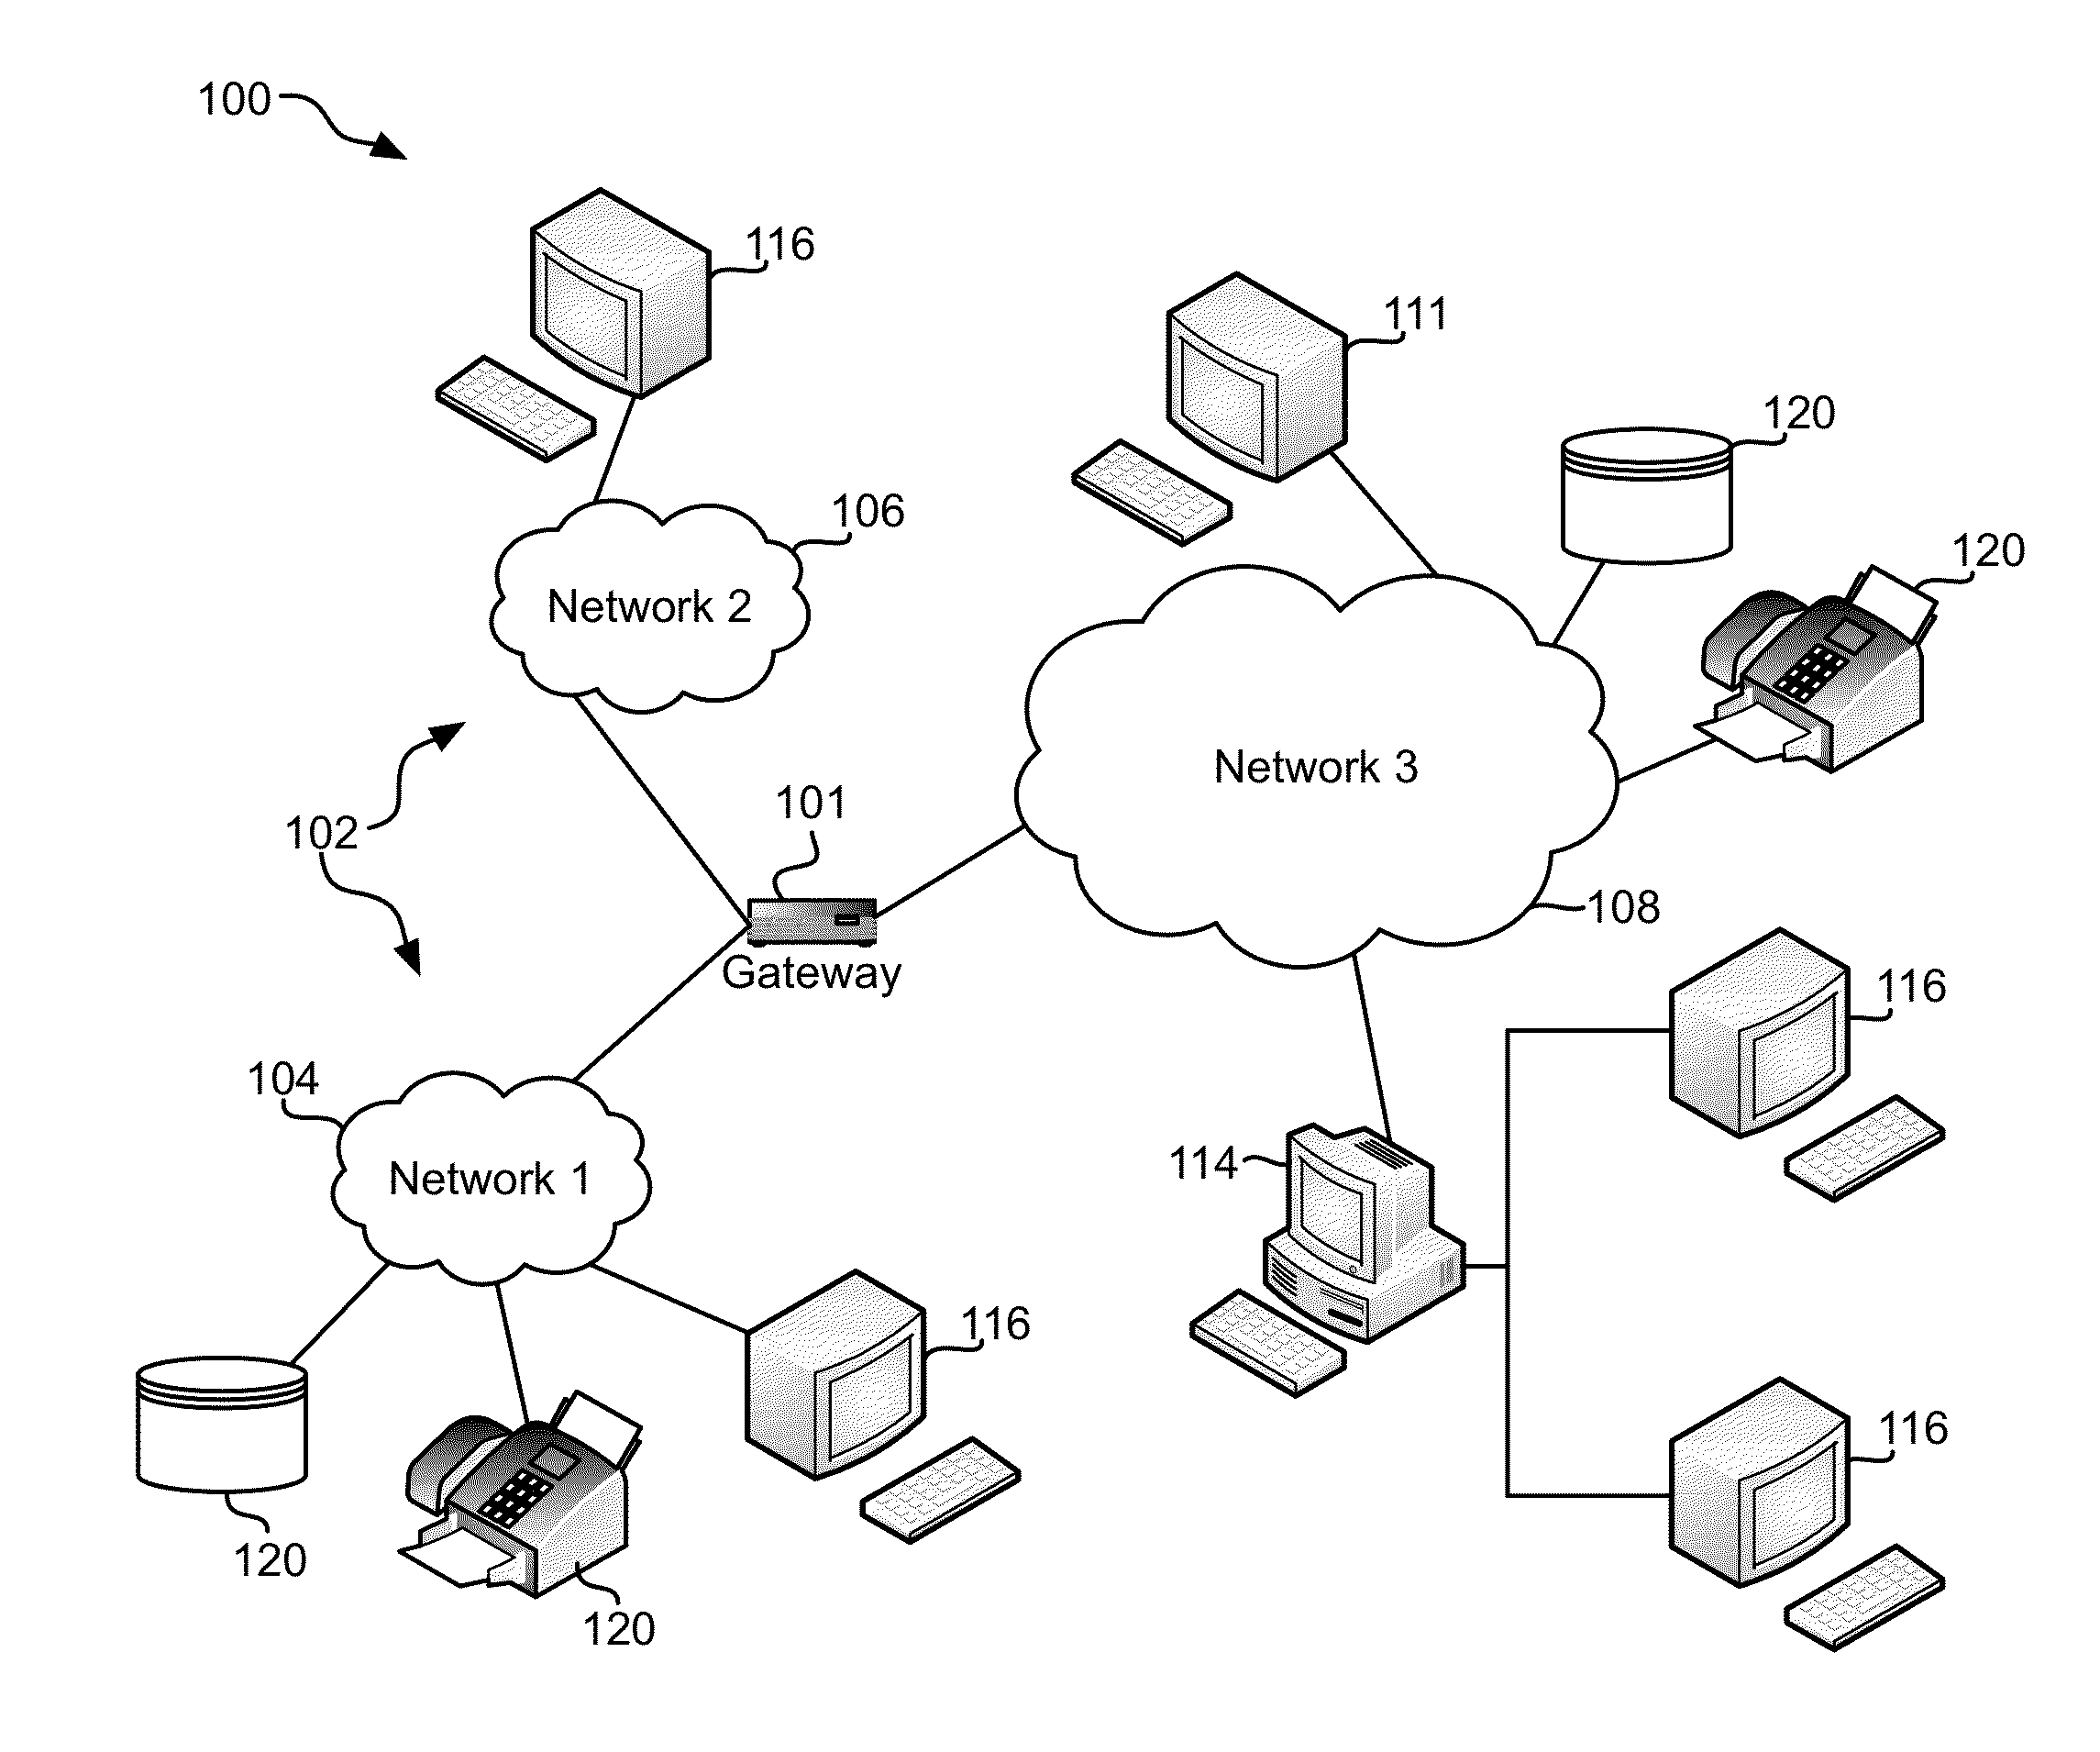 Systems and methods for classifying objects in digital images captured using mobile devices